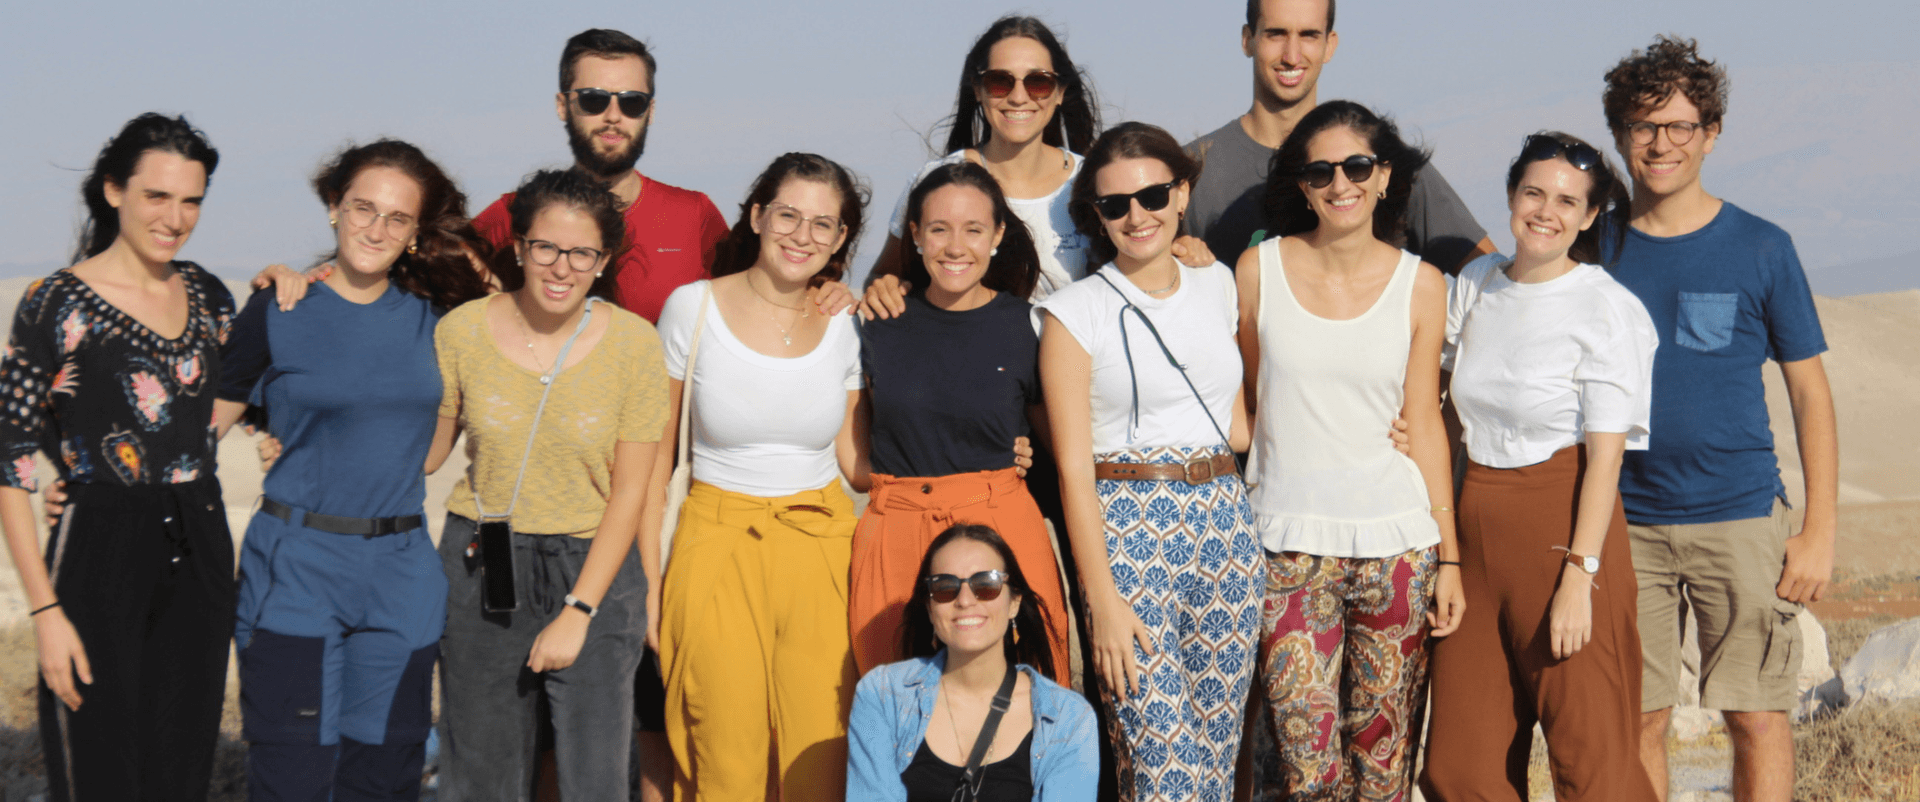 <strong>A year of civil service in the Holy Land: interview with two volunteers</strong>